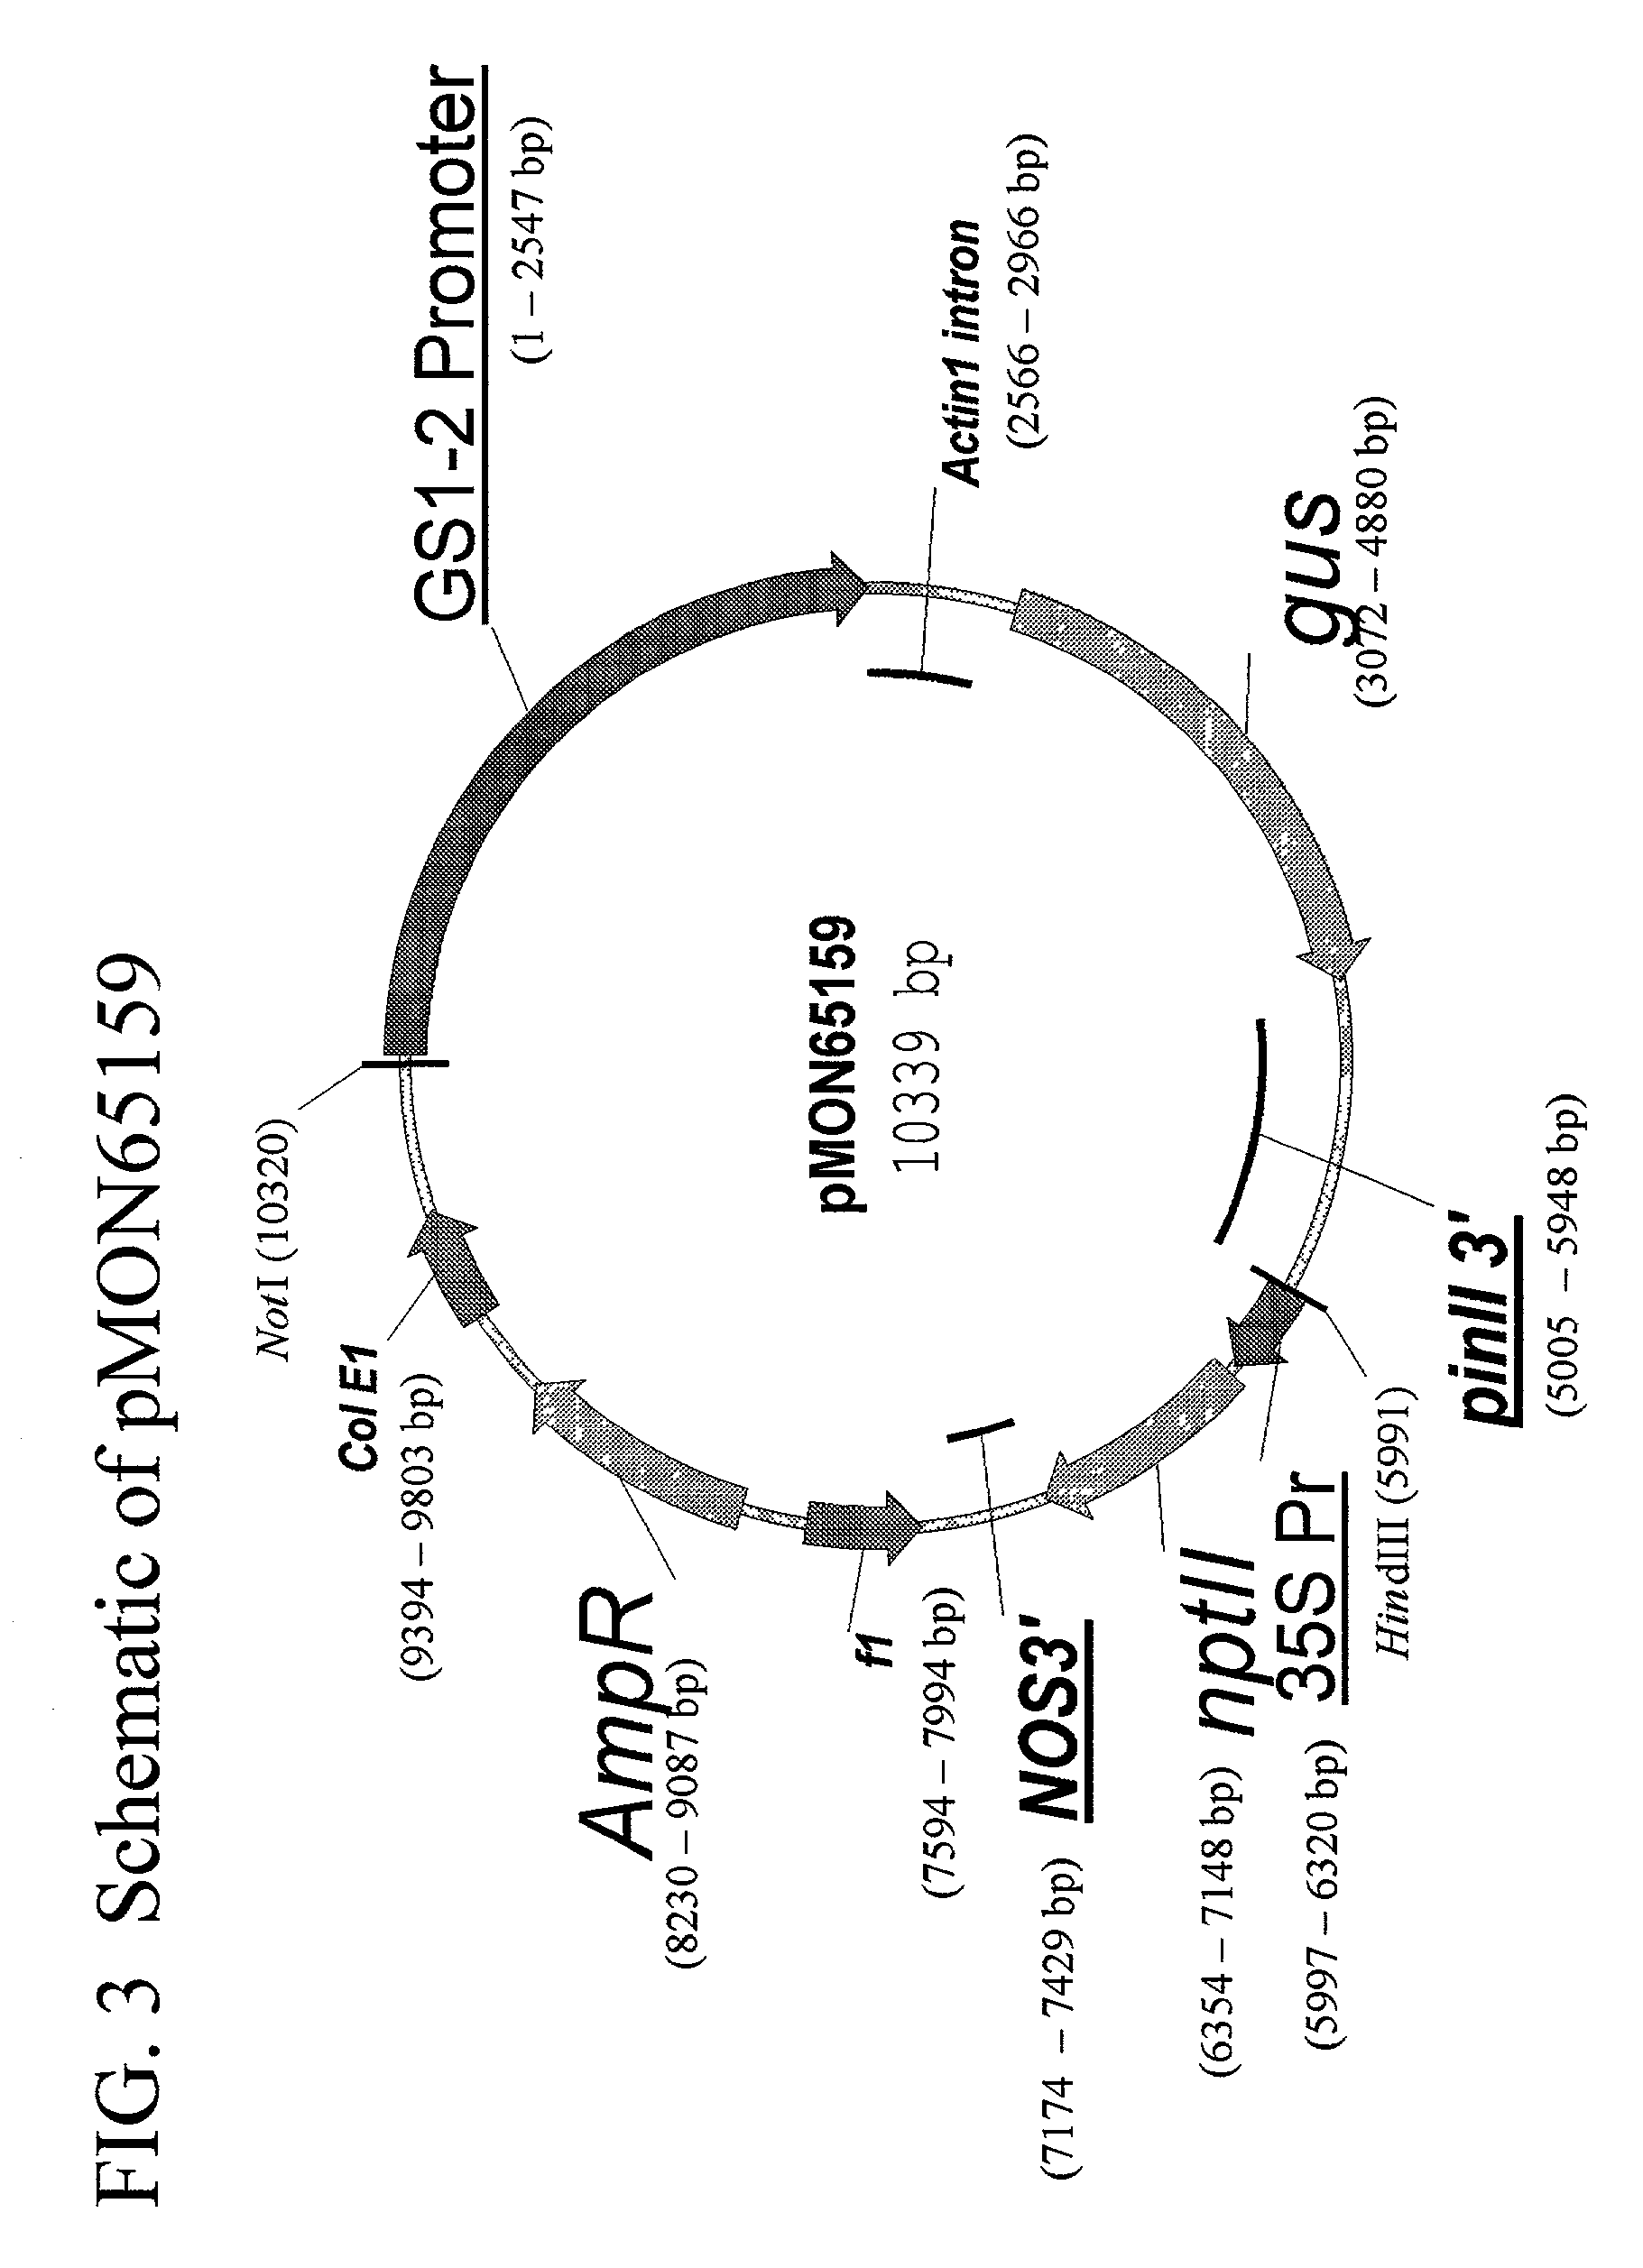 Maize cytoplasmic glutamine synthetase promoter compositions and methods for use thereof